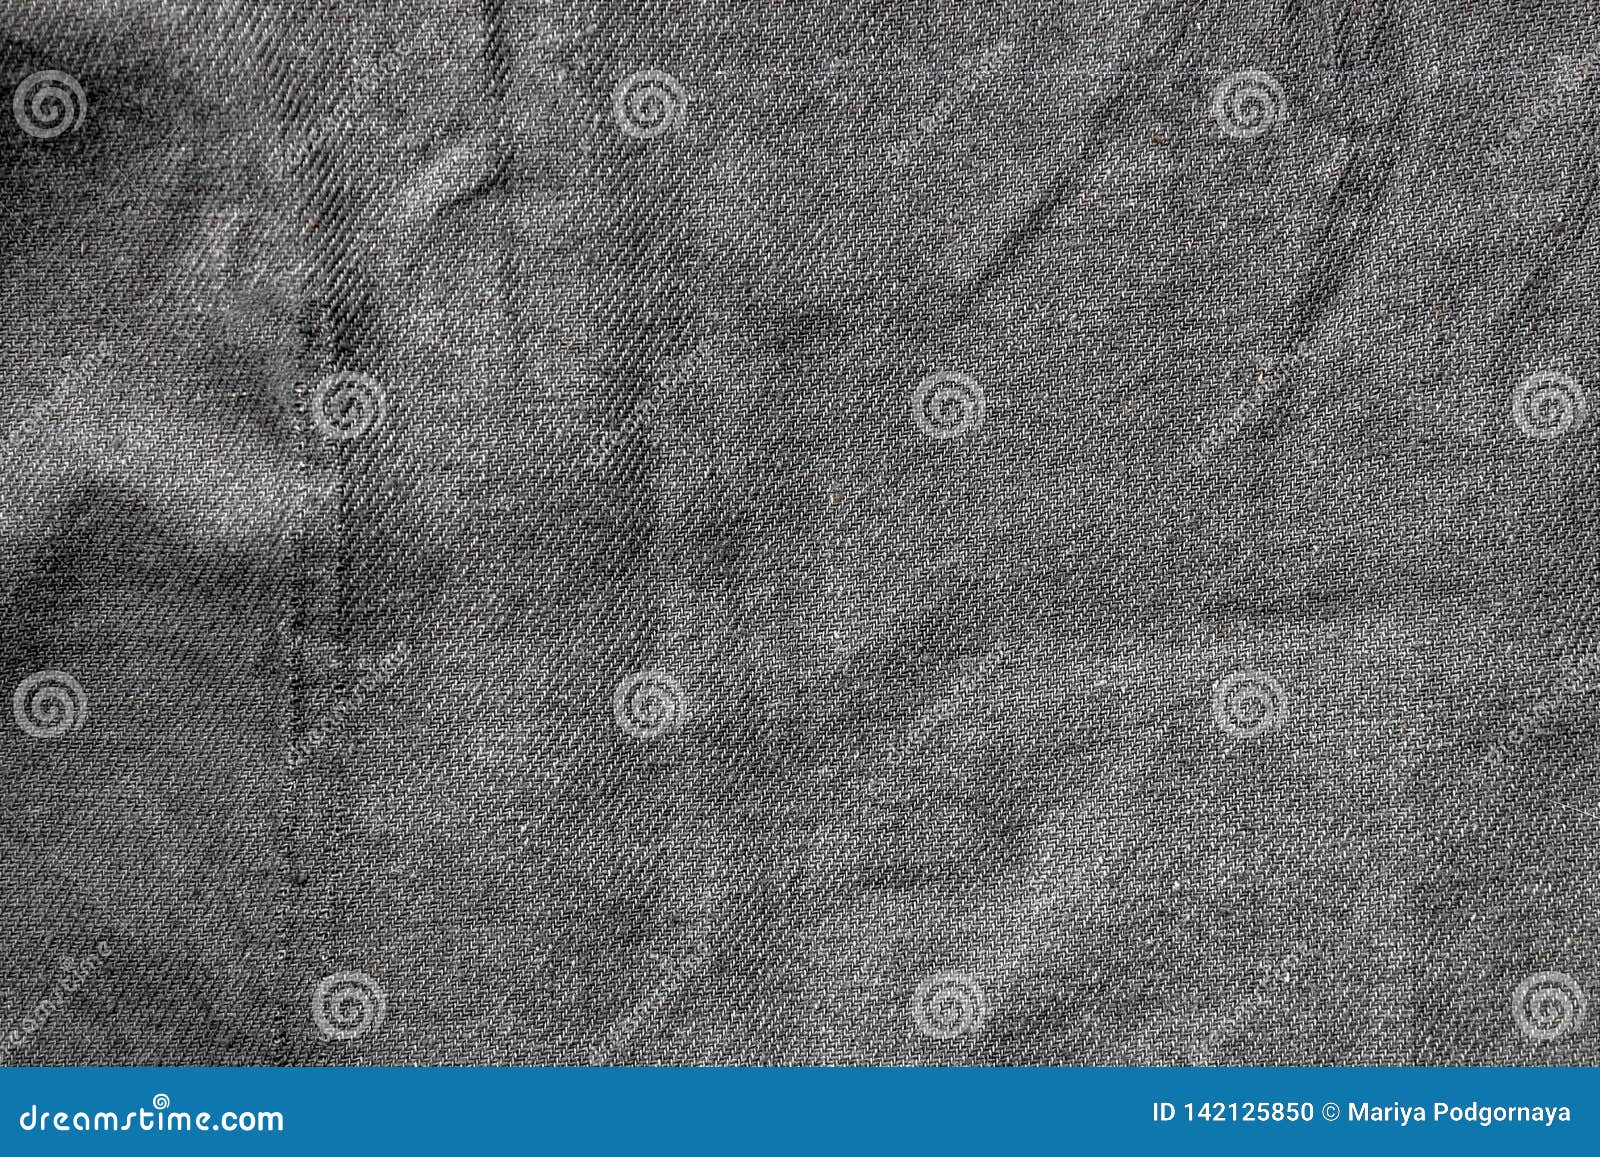 Crumpled Dark Gray Fabric Texture As Background Stock Photo - Image of ...